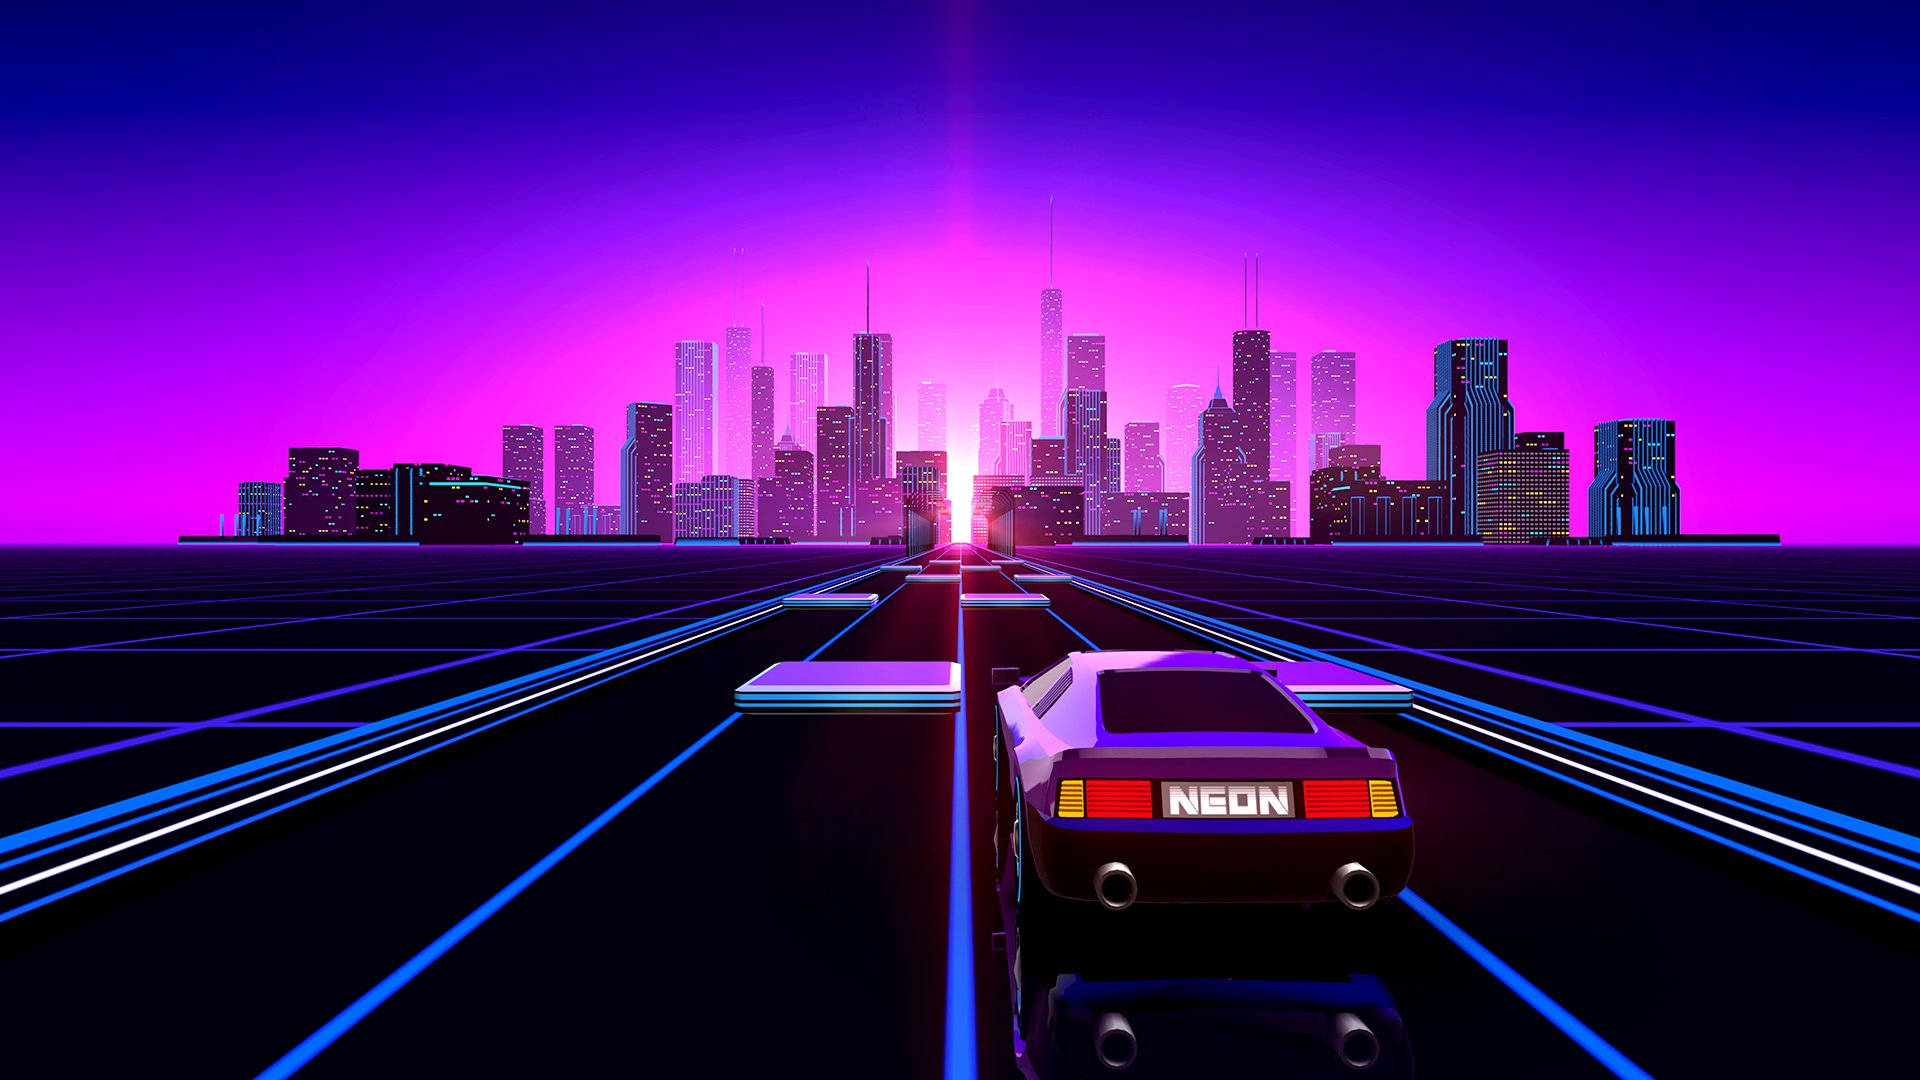 Set course for the sleek and stylish Retrowave City, the destination of dreams. Wallpaper